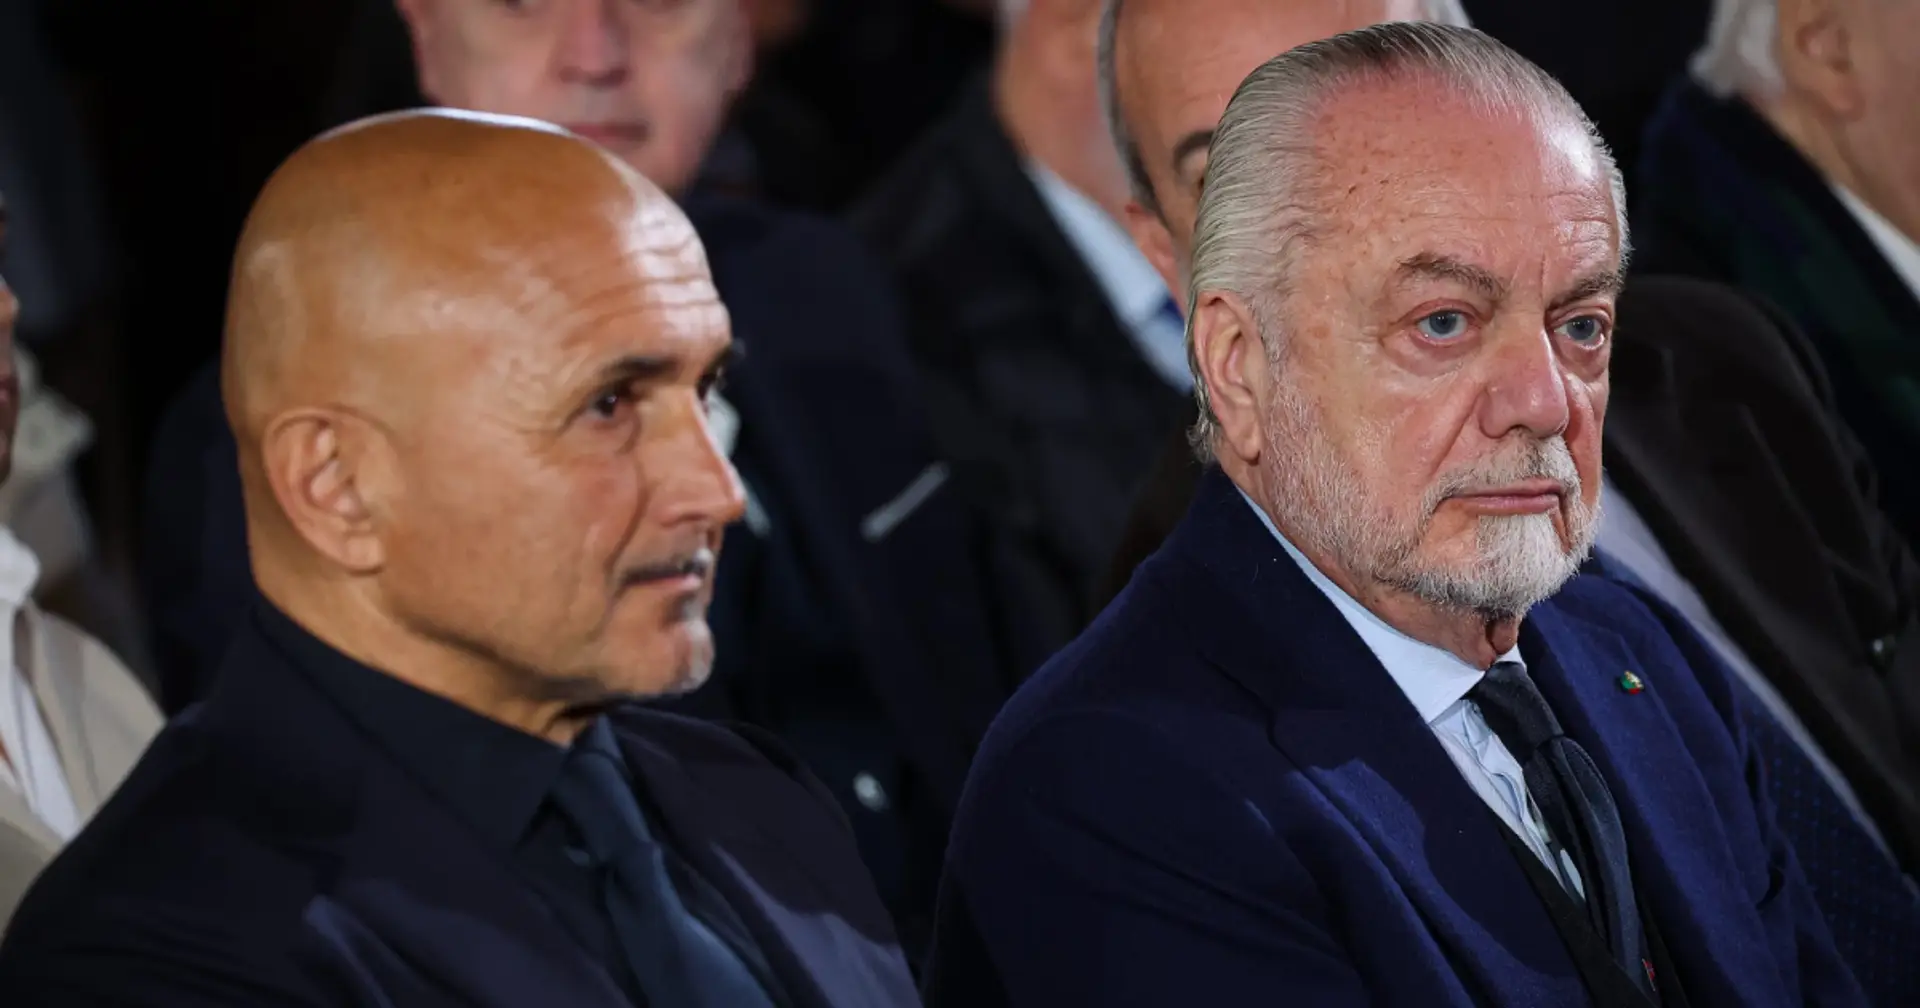 Luciano Spalletti could quit Napoli despite Serie A trophy, Benitez named potential replacement